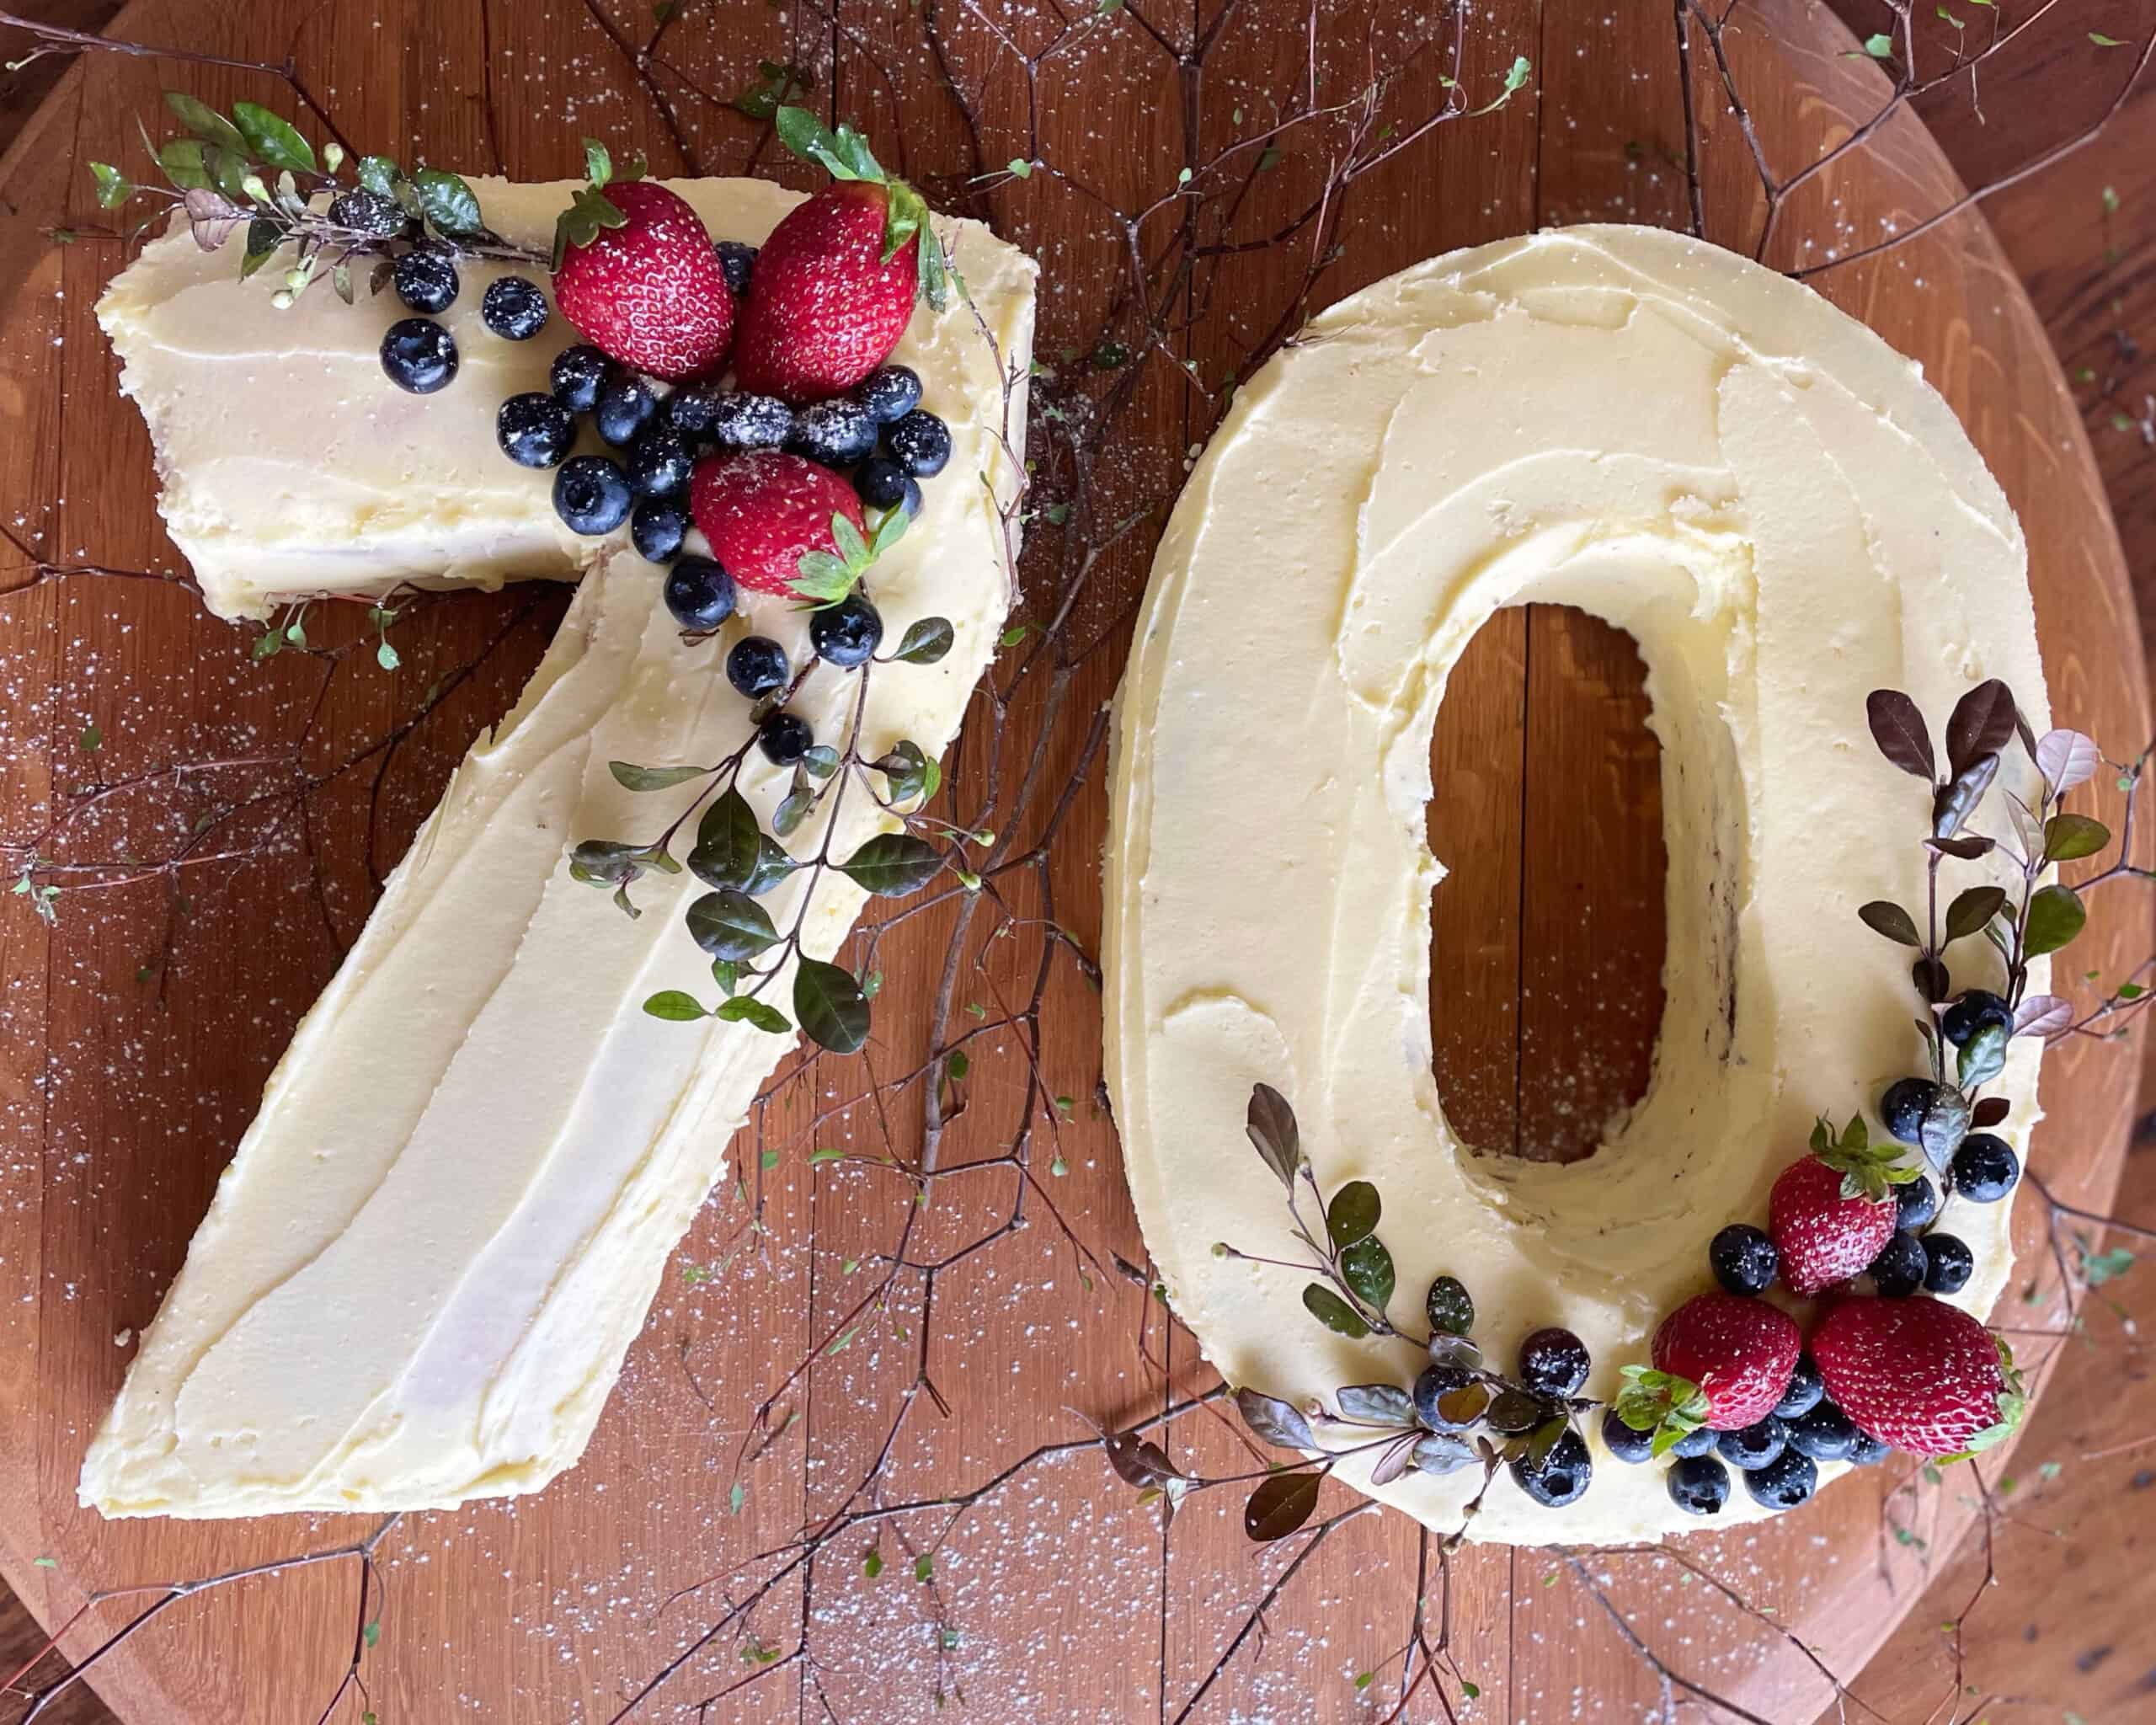 A 7 and 0 number cake with white icing and fruit on top.